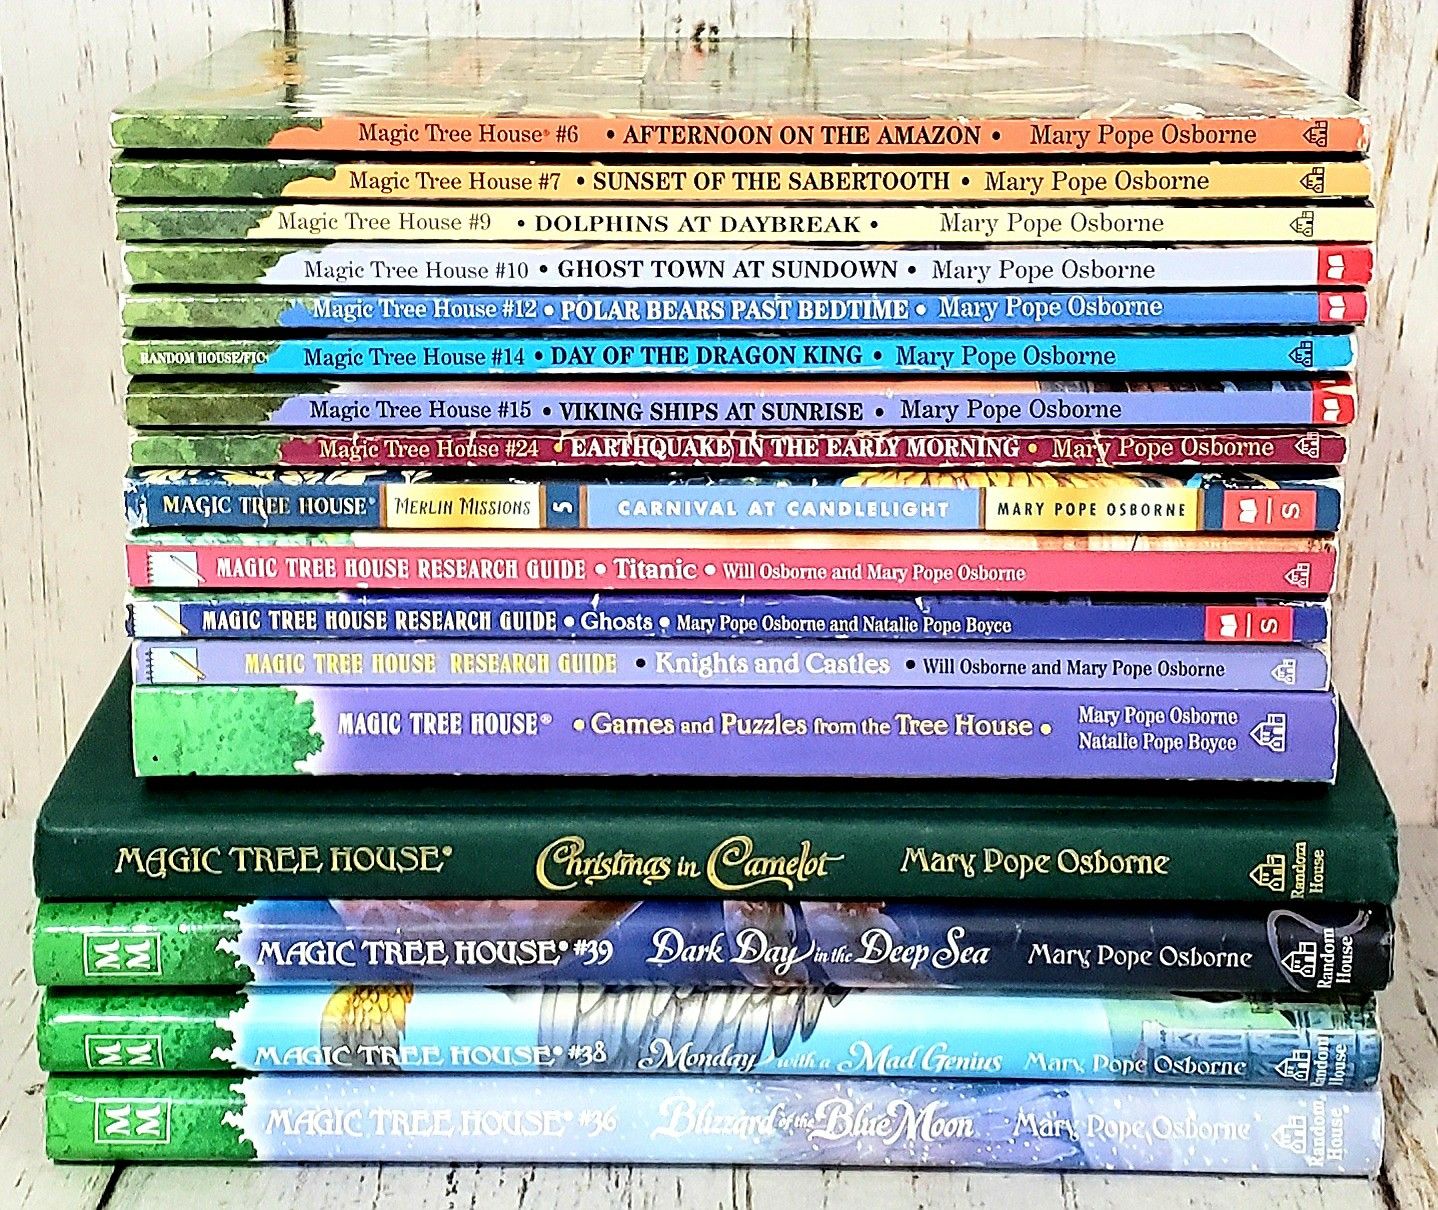 Magic Tree House Lot of 17 Books - 13 Paperback, 4 Hardcover, Merlin Missions